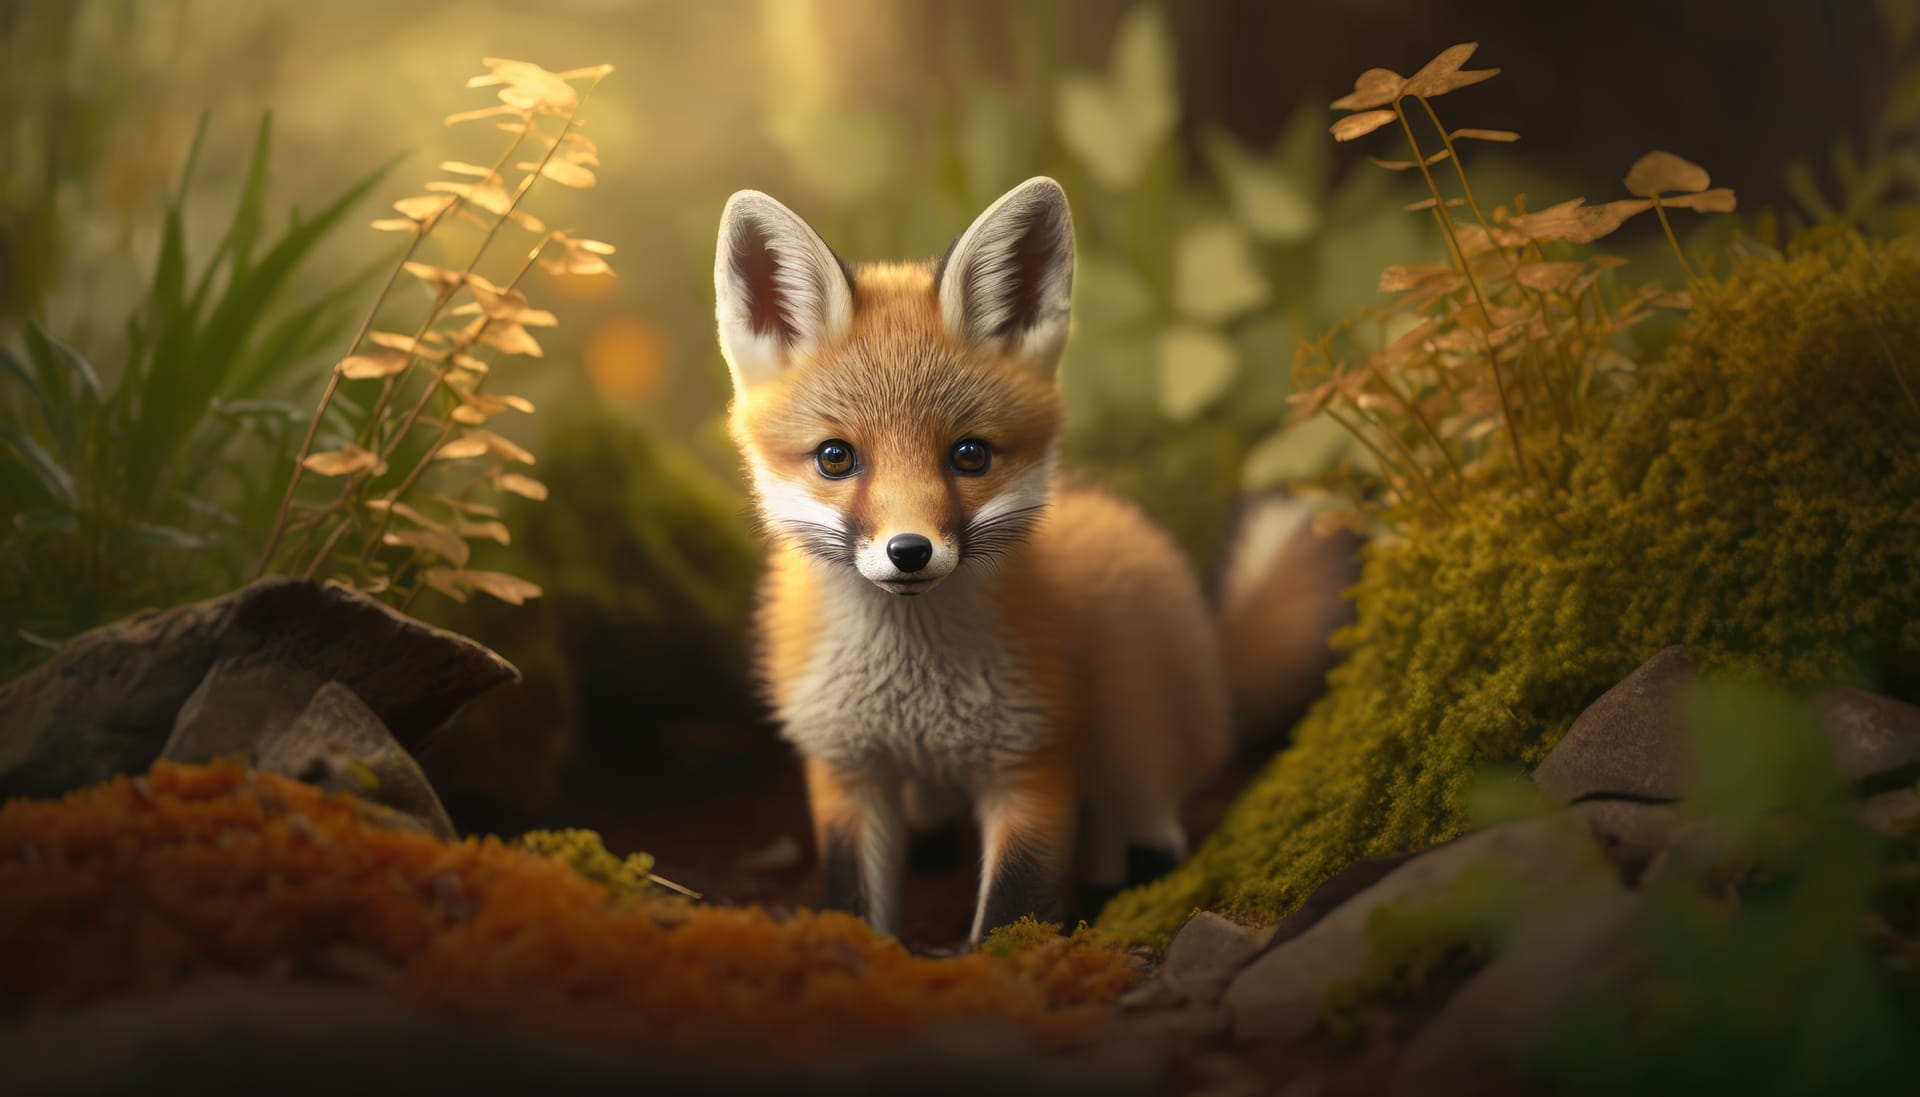 Fox forest with forest background animal photo